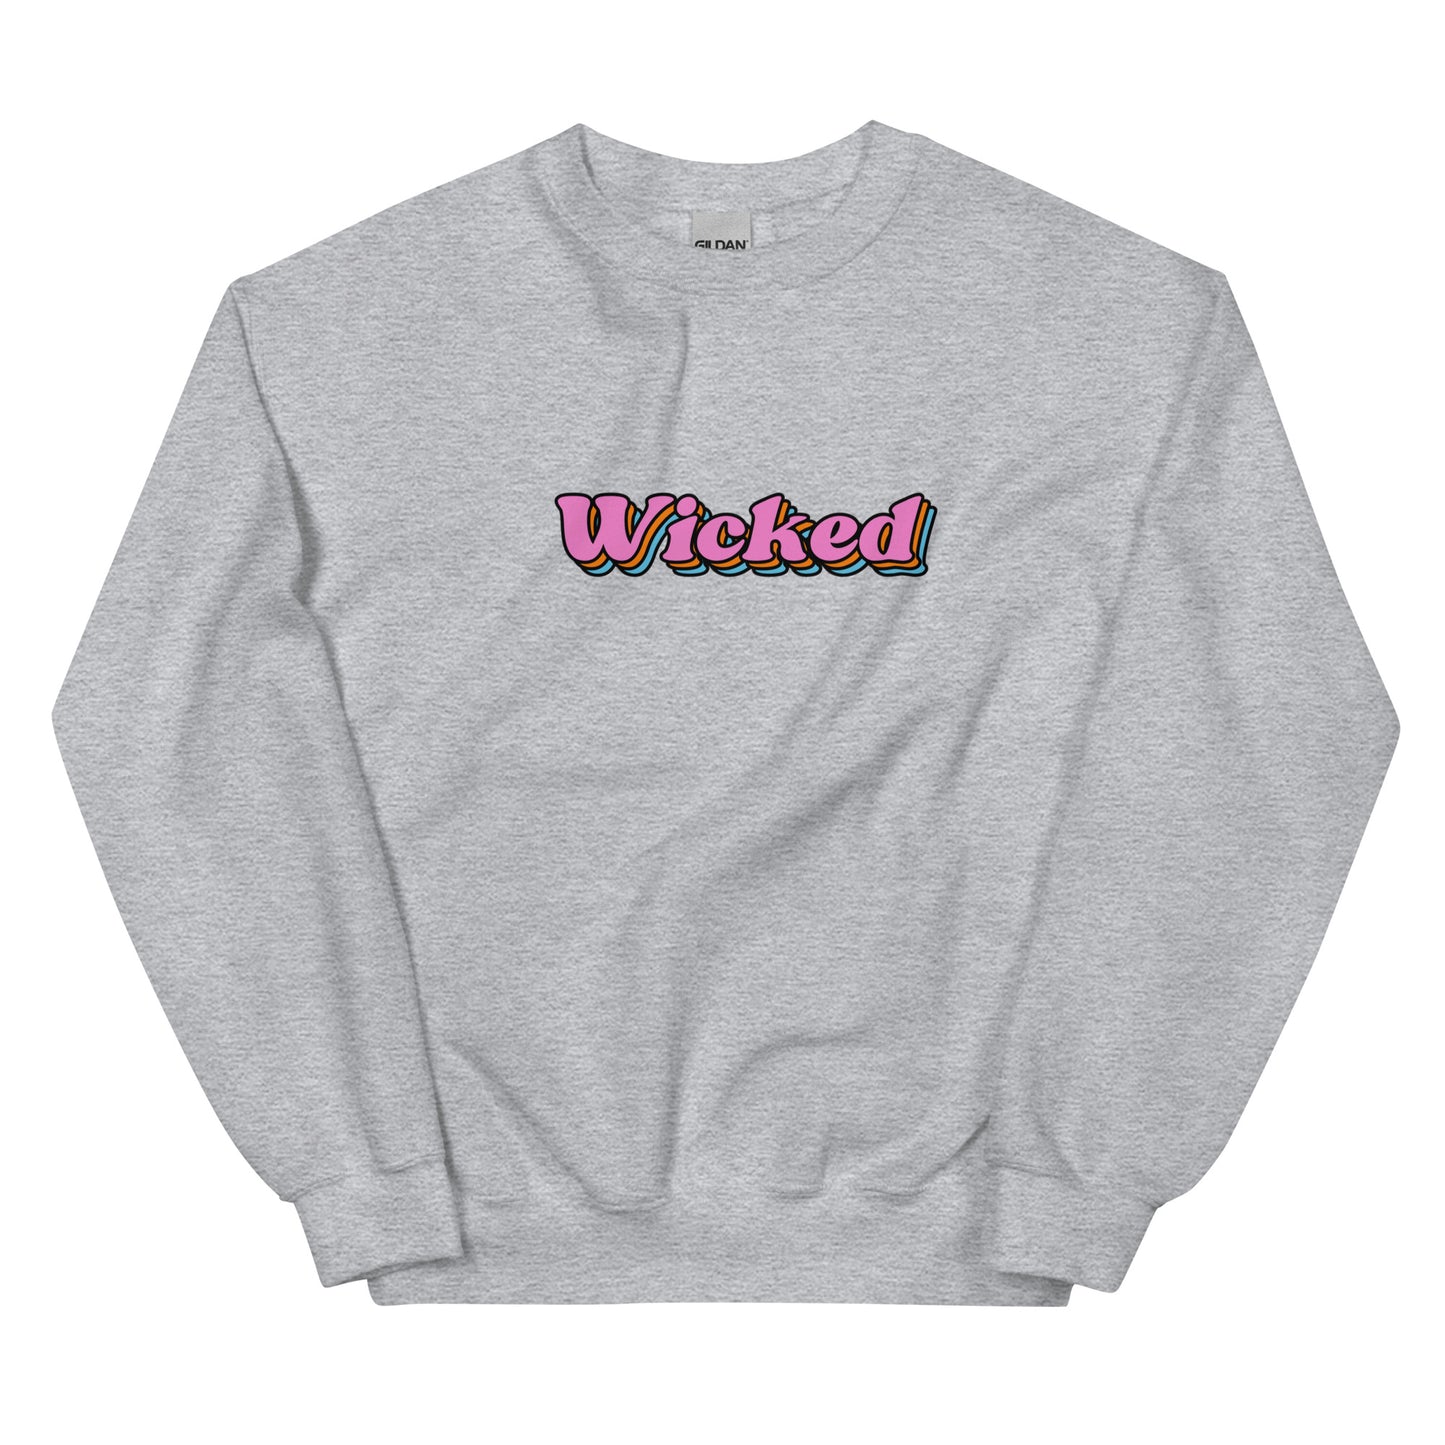 grey crewneck that says "wicked" in pink lettering